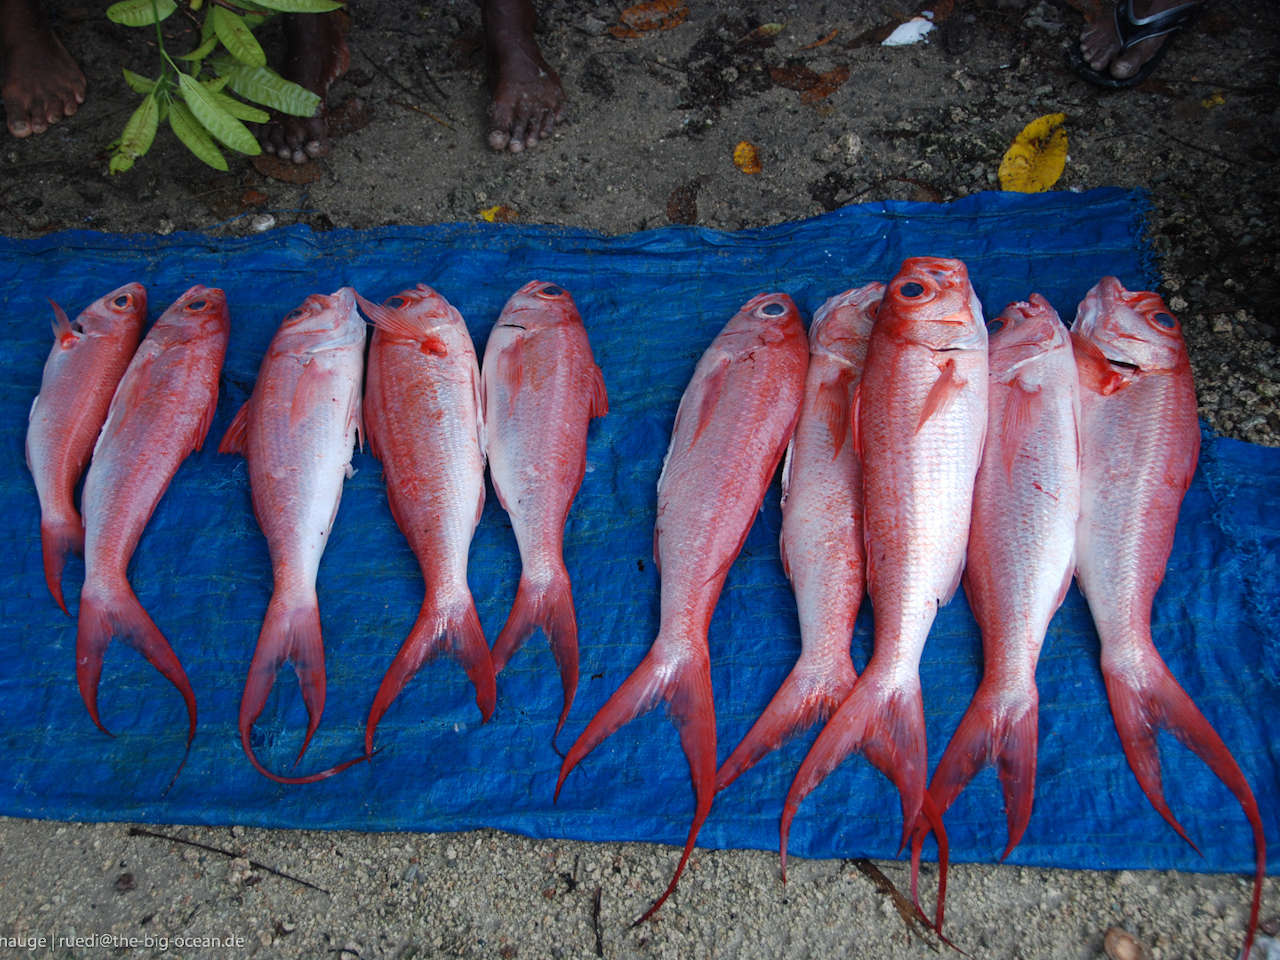 Red fish on a blue sheet